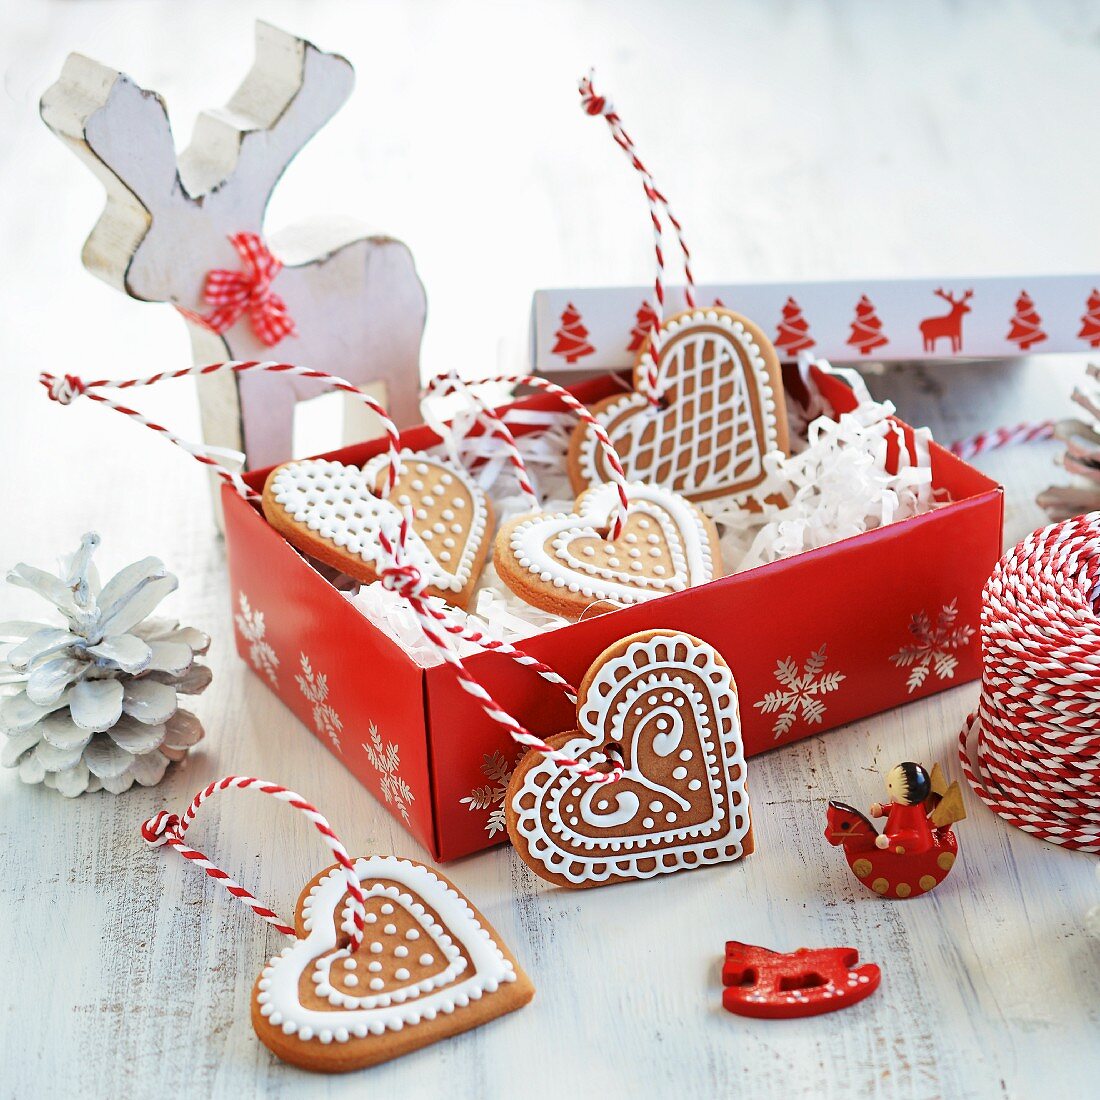 Christmas biscuits decorated with icing in a gift box